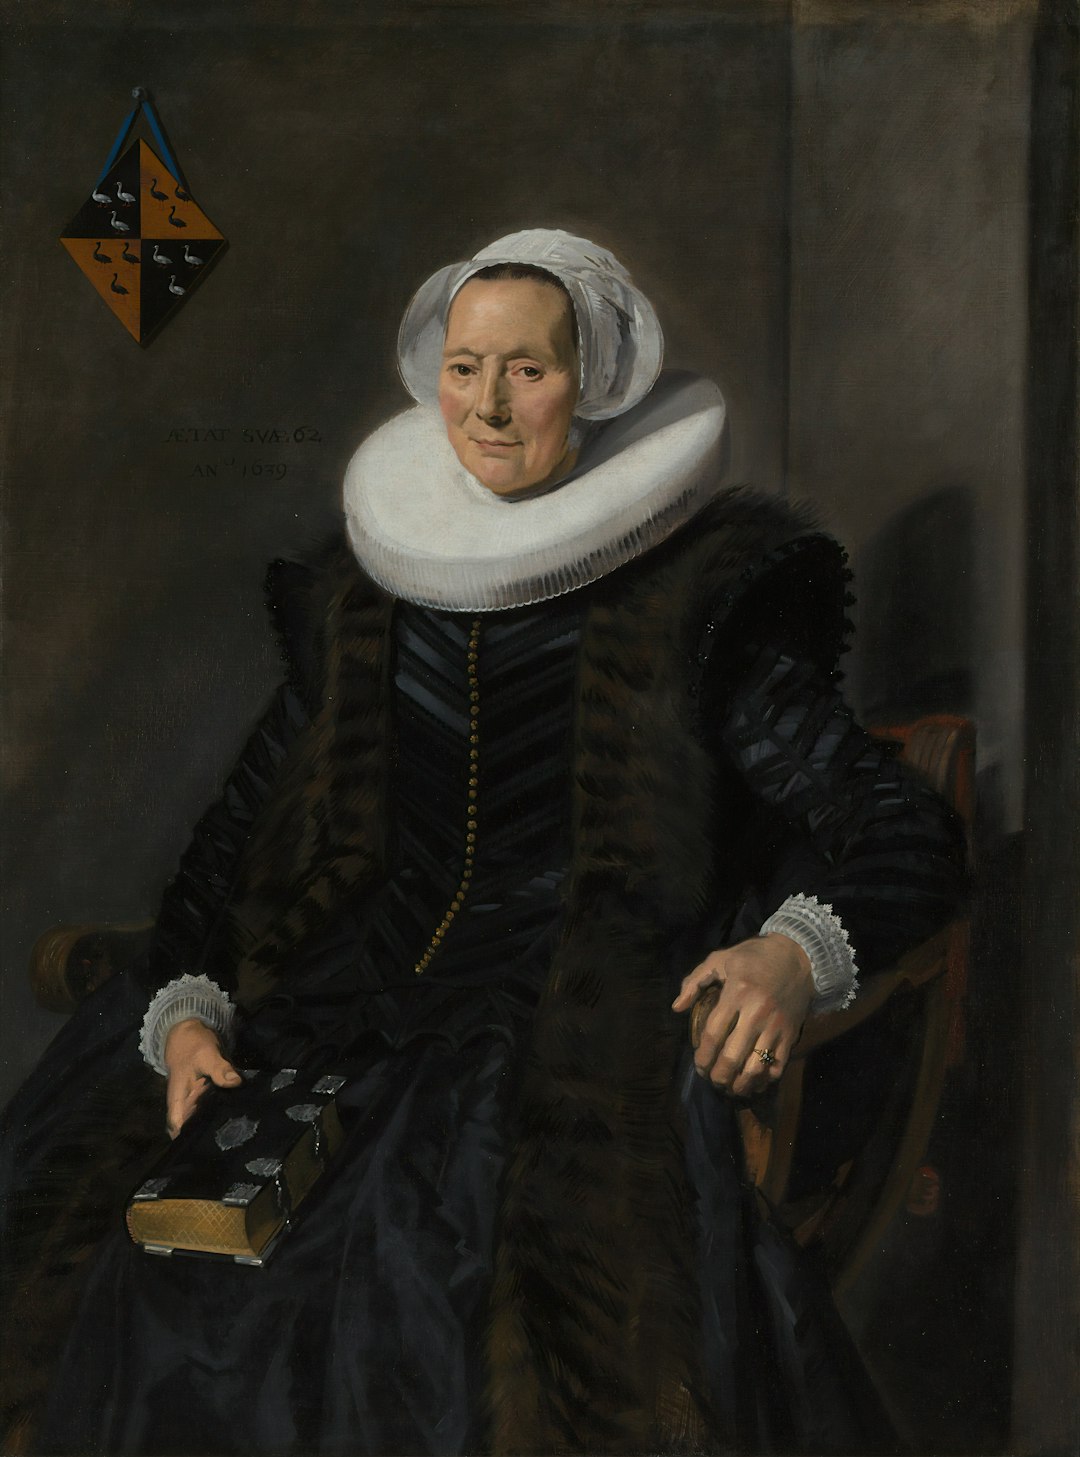 woman in black and white coat sitting on chair